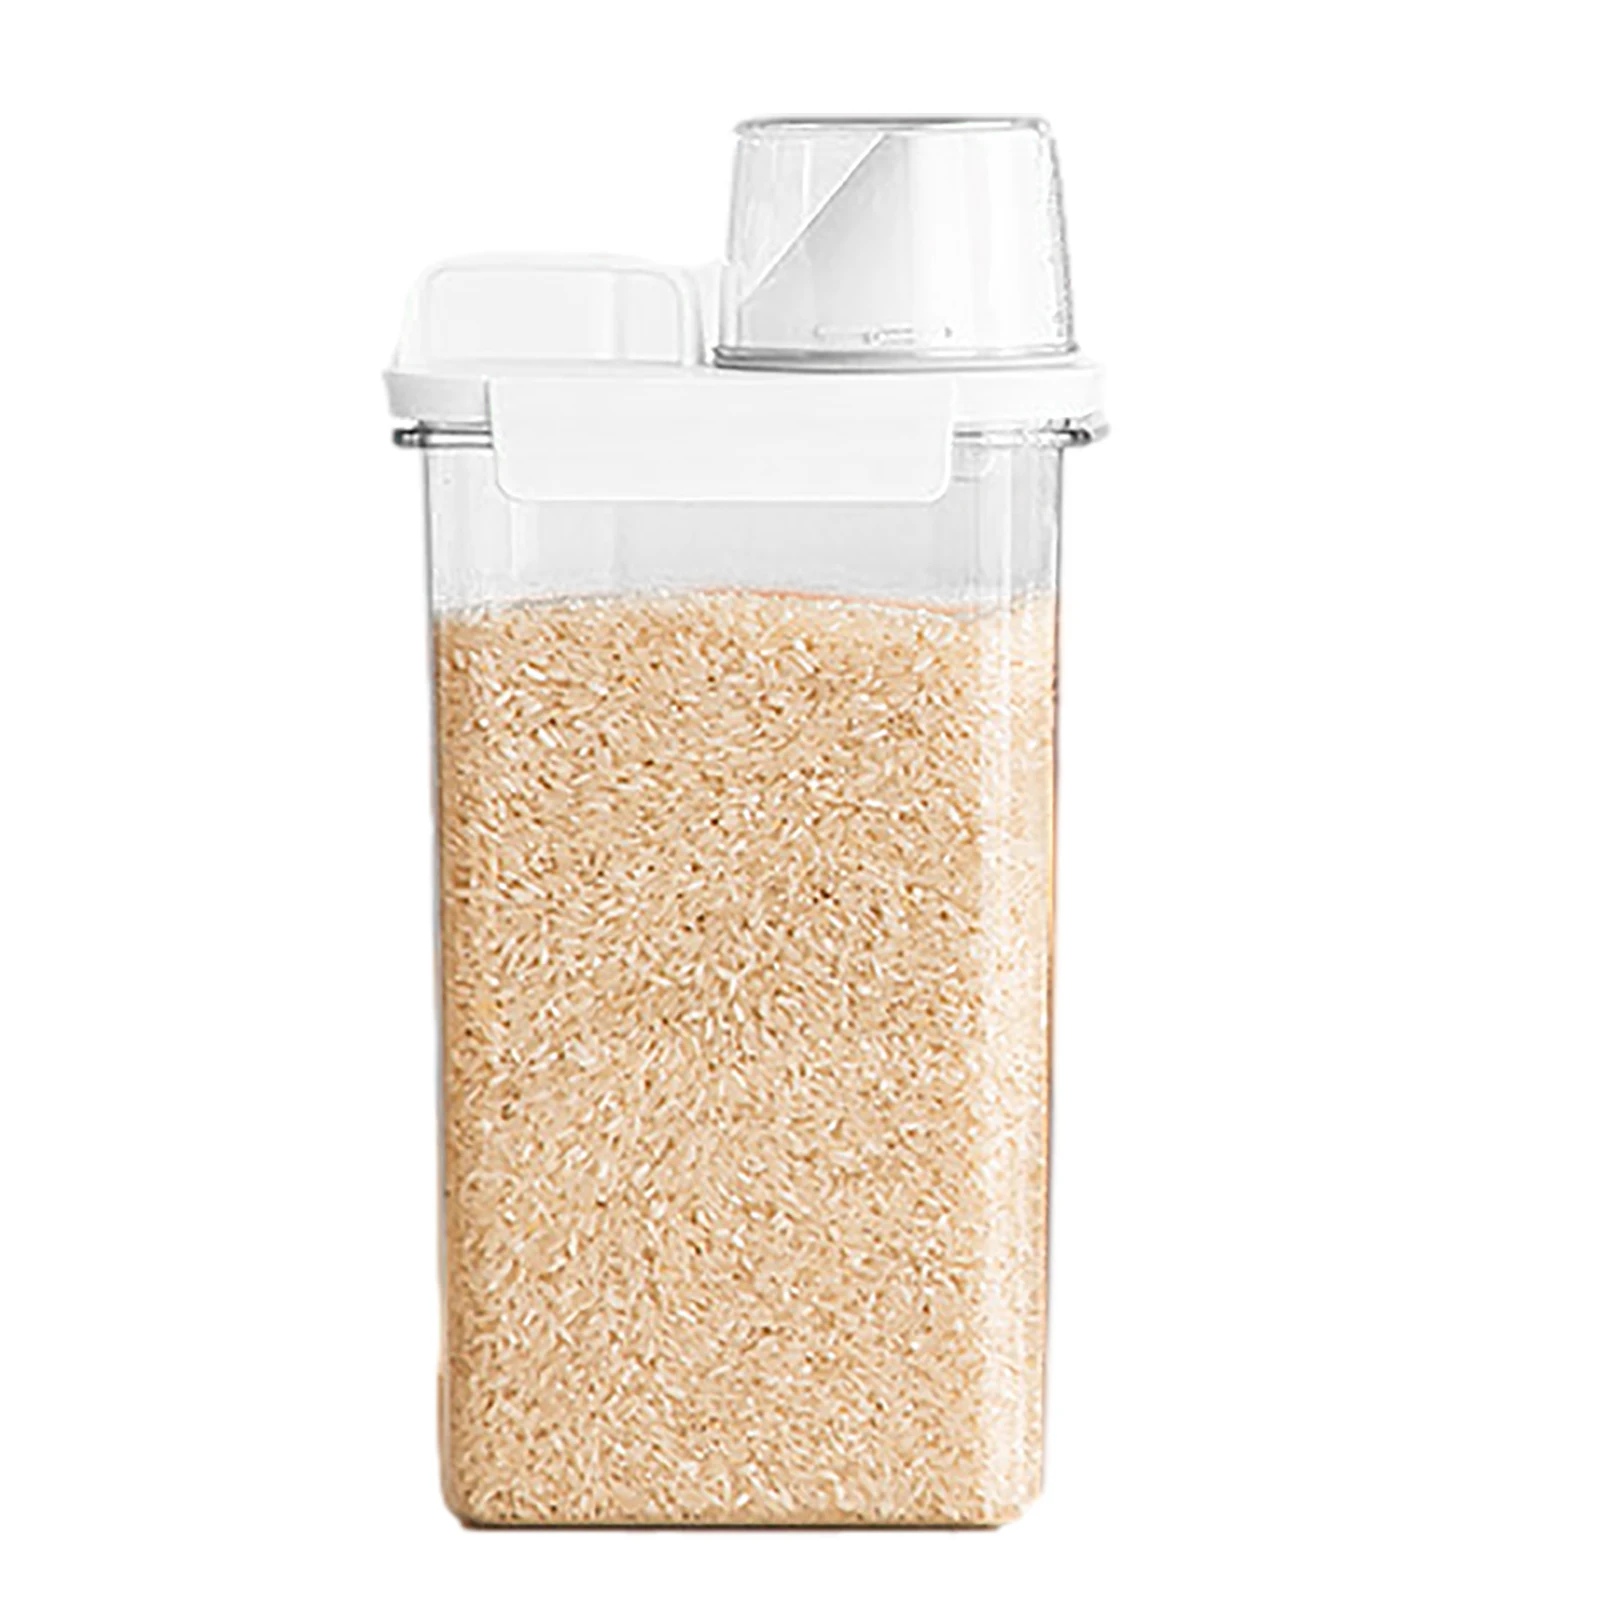 

Cereal Dispenser Rice Cereal Storage Container Kitchen Food Dispenser Storage Container For Grains Nuts Beans Rice